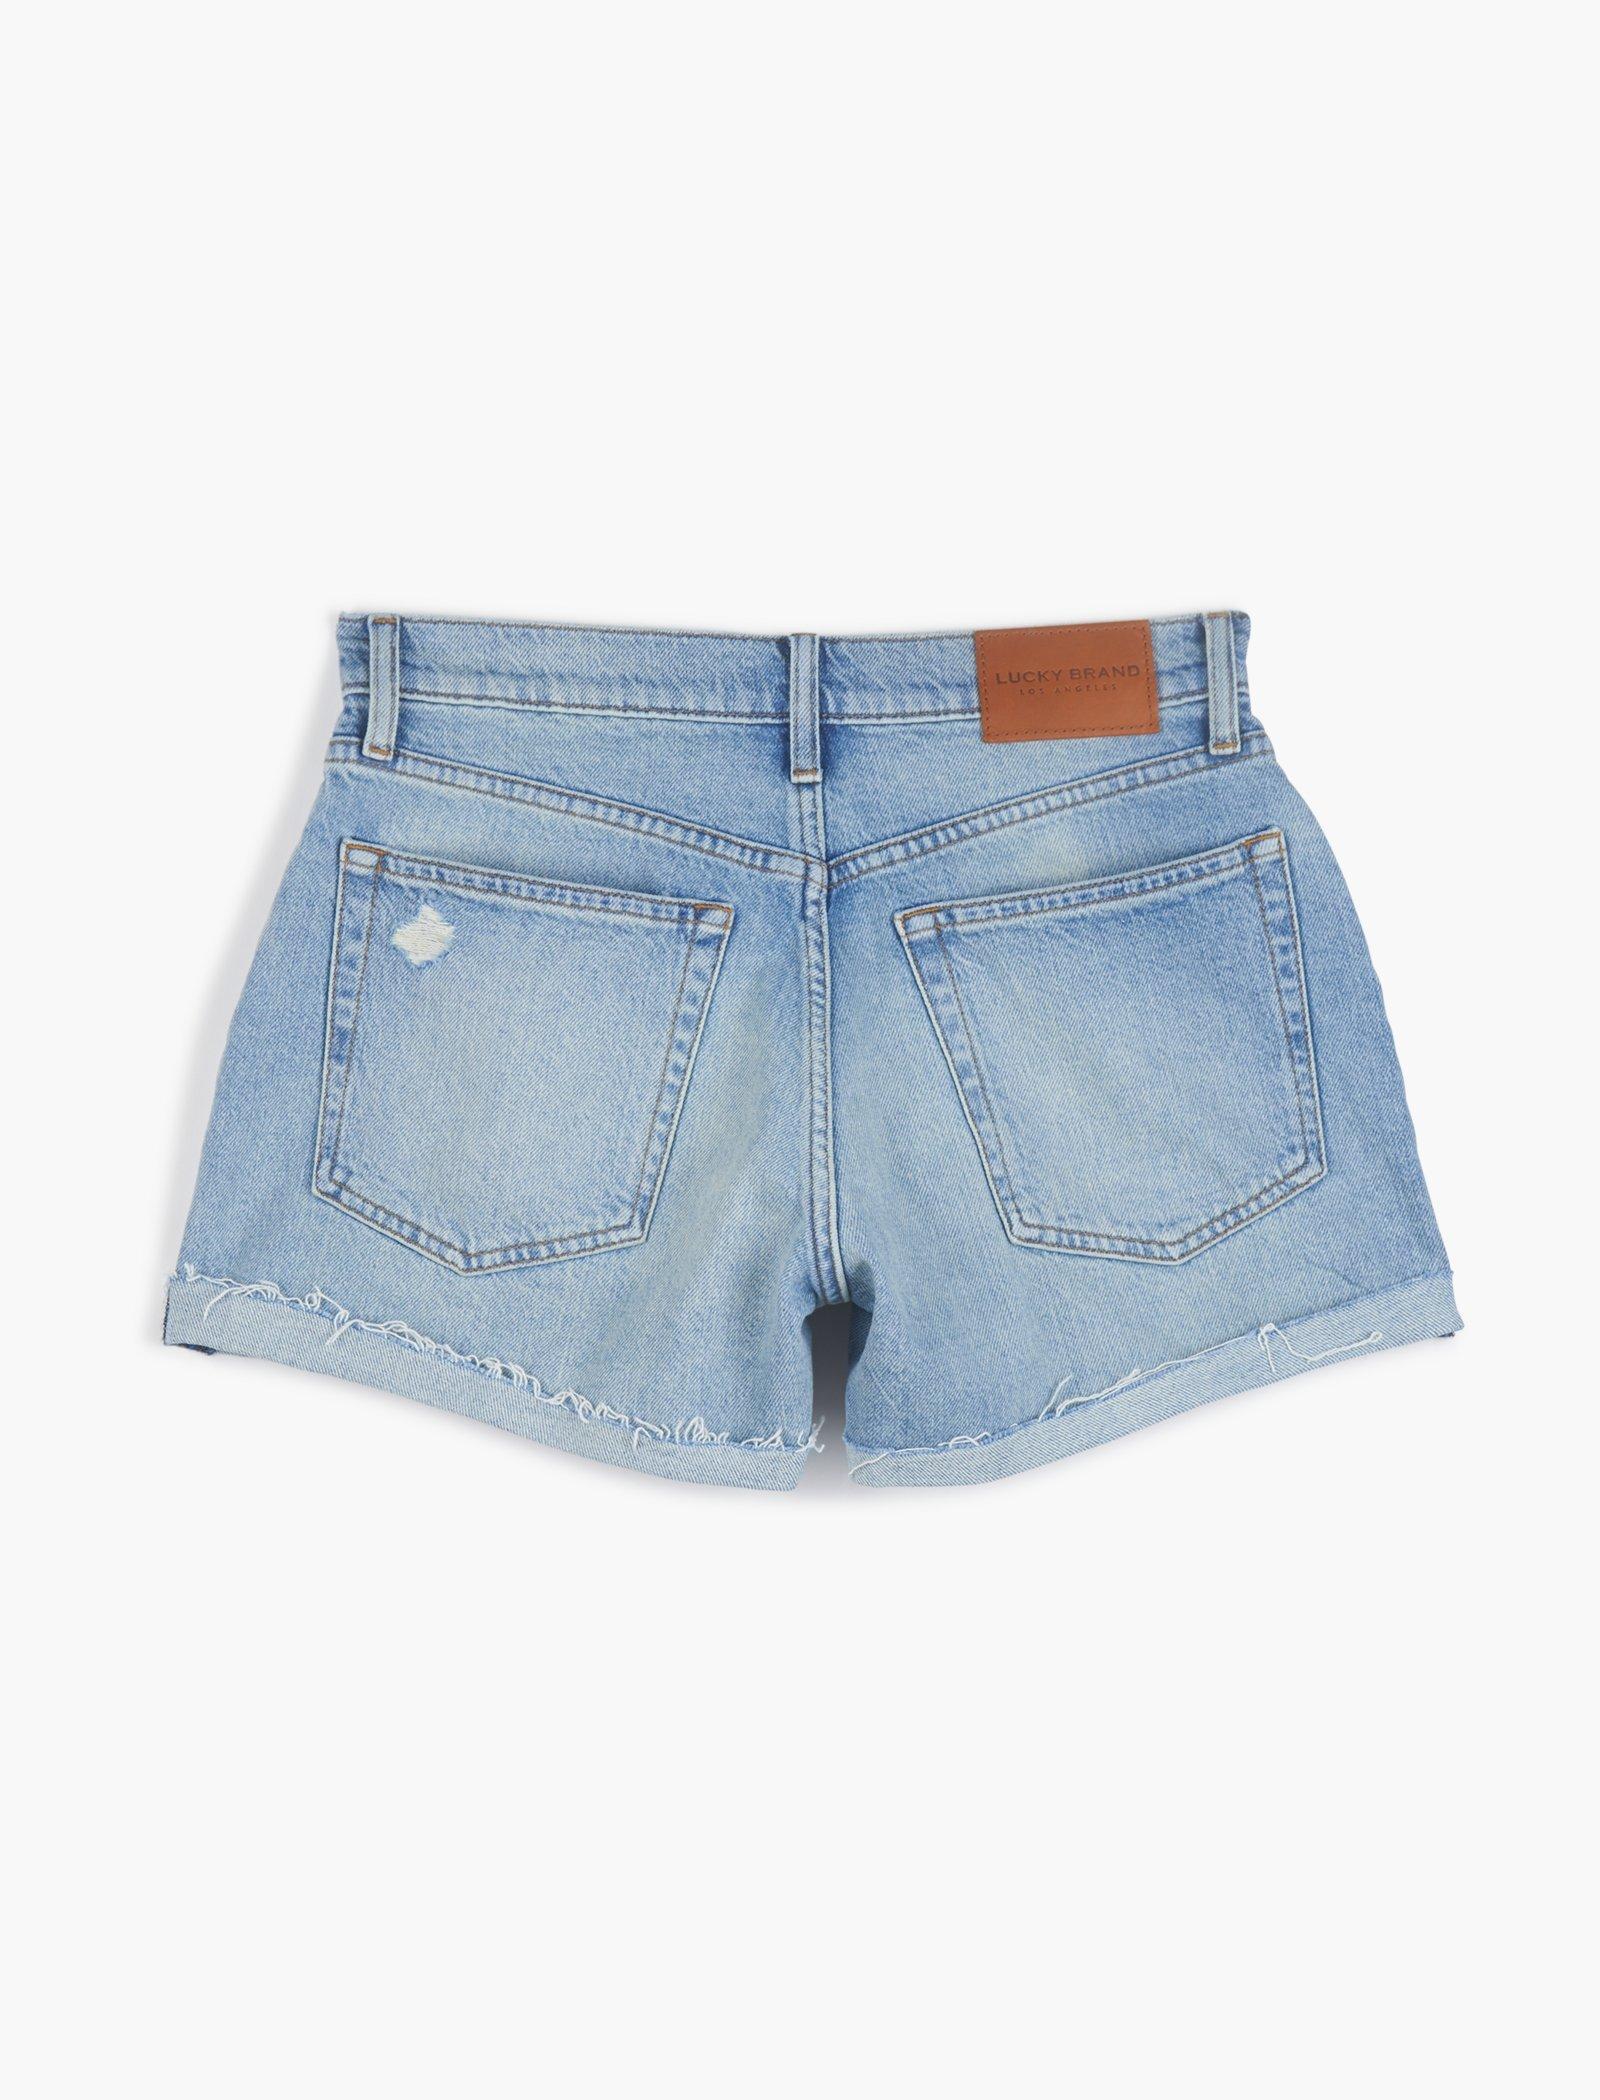 Lucky Brand Distressed Jean Shorts